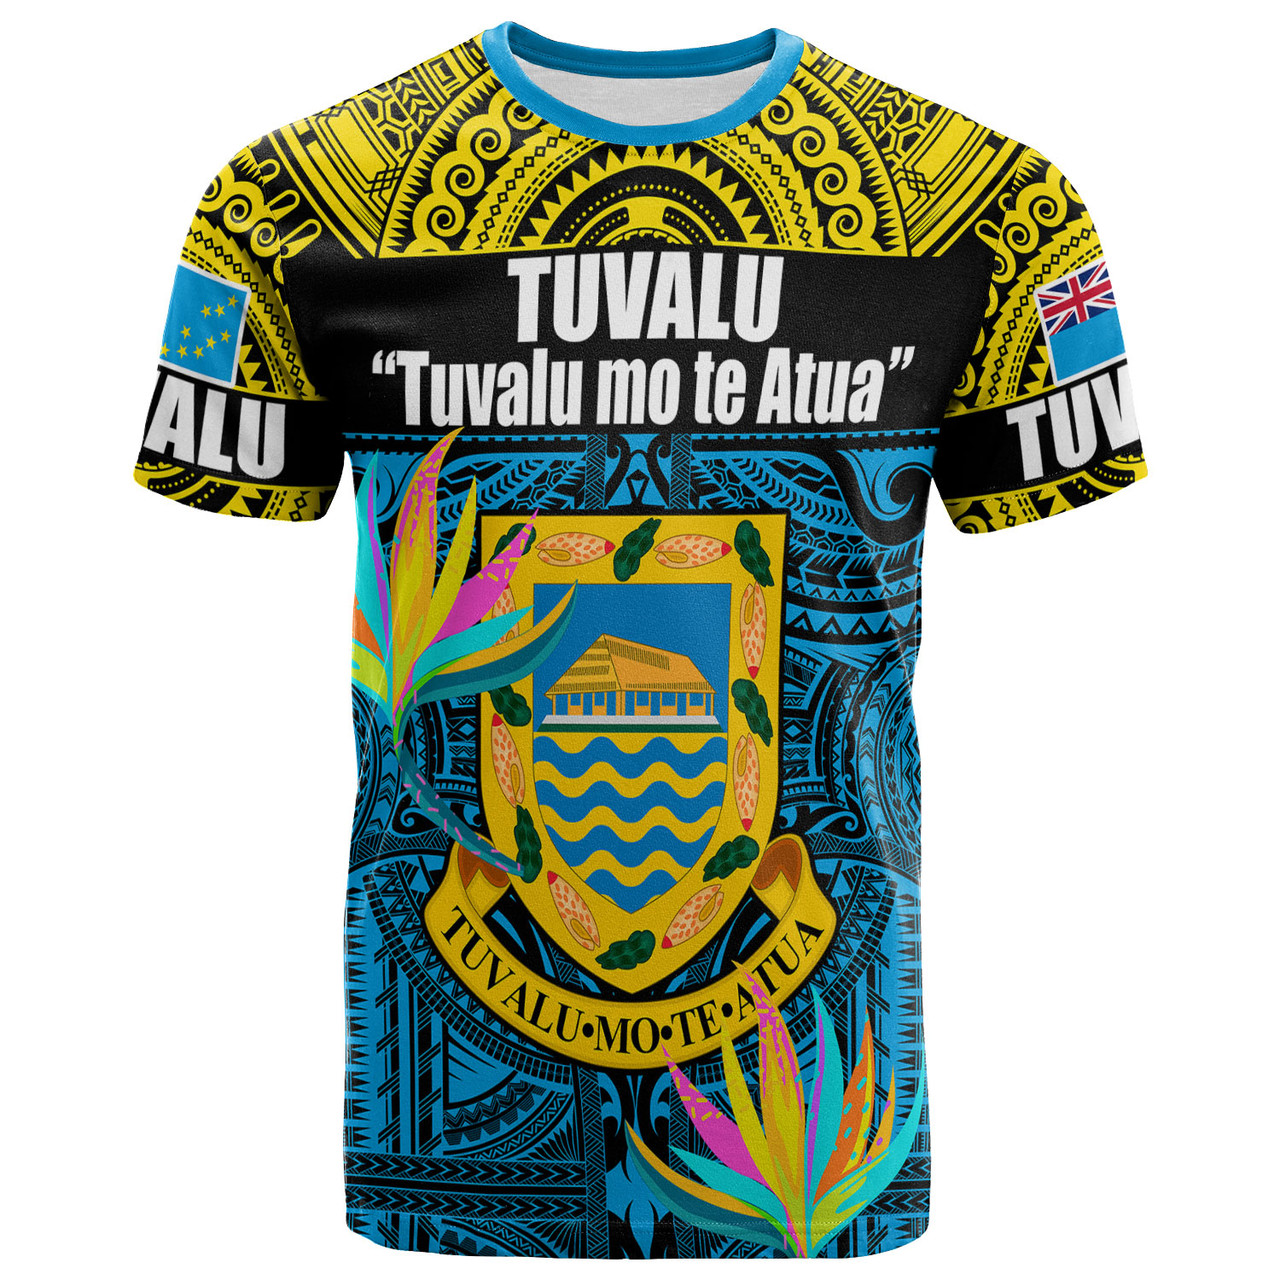 Tuvalu Motto Polynesian T-shirt - Custom Tuvalu Coat Of Arms With Tropical Themed Backgrounds T-shirt